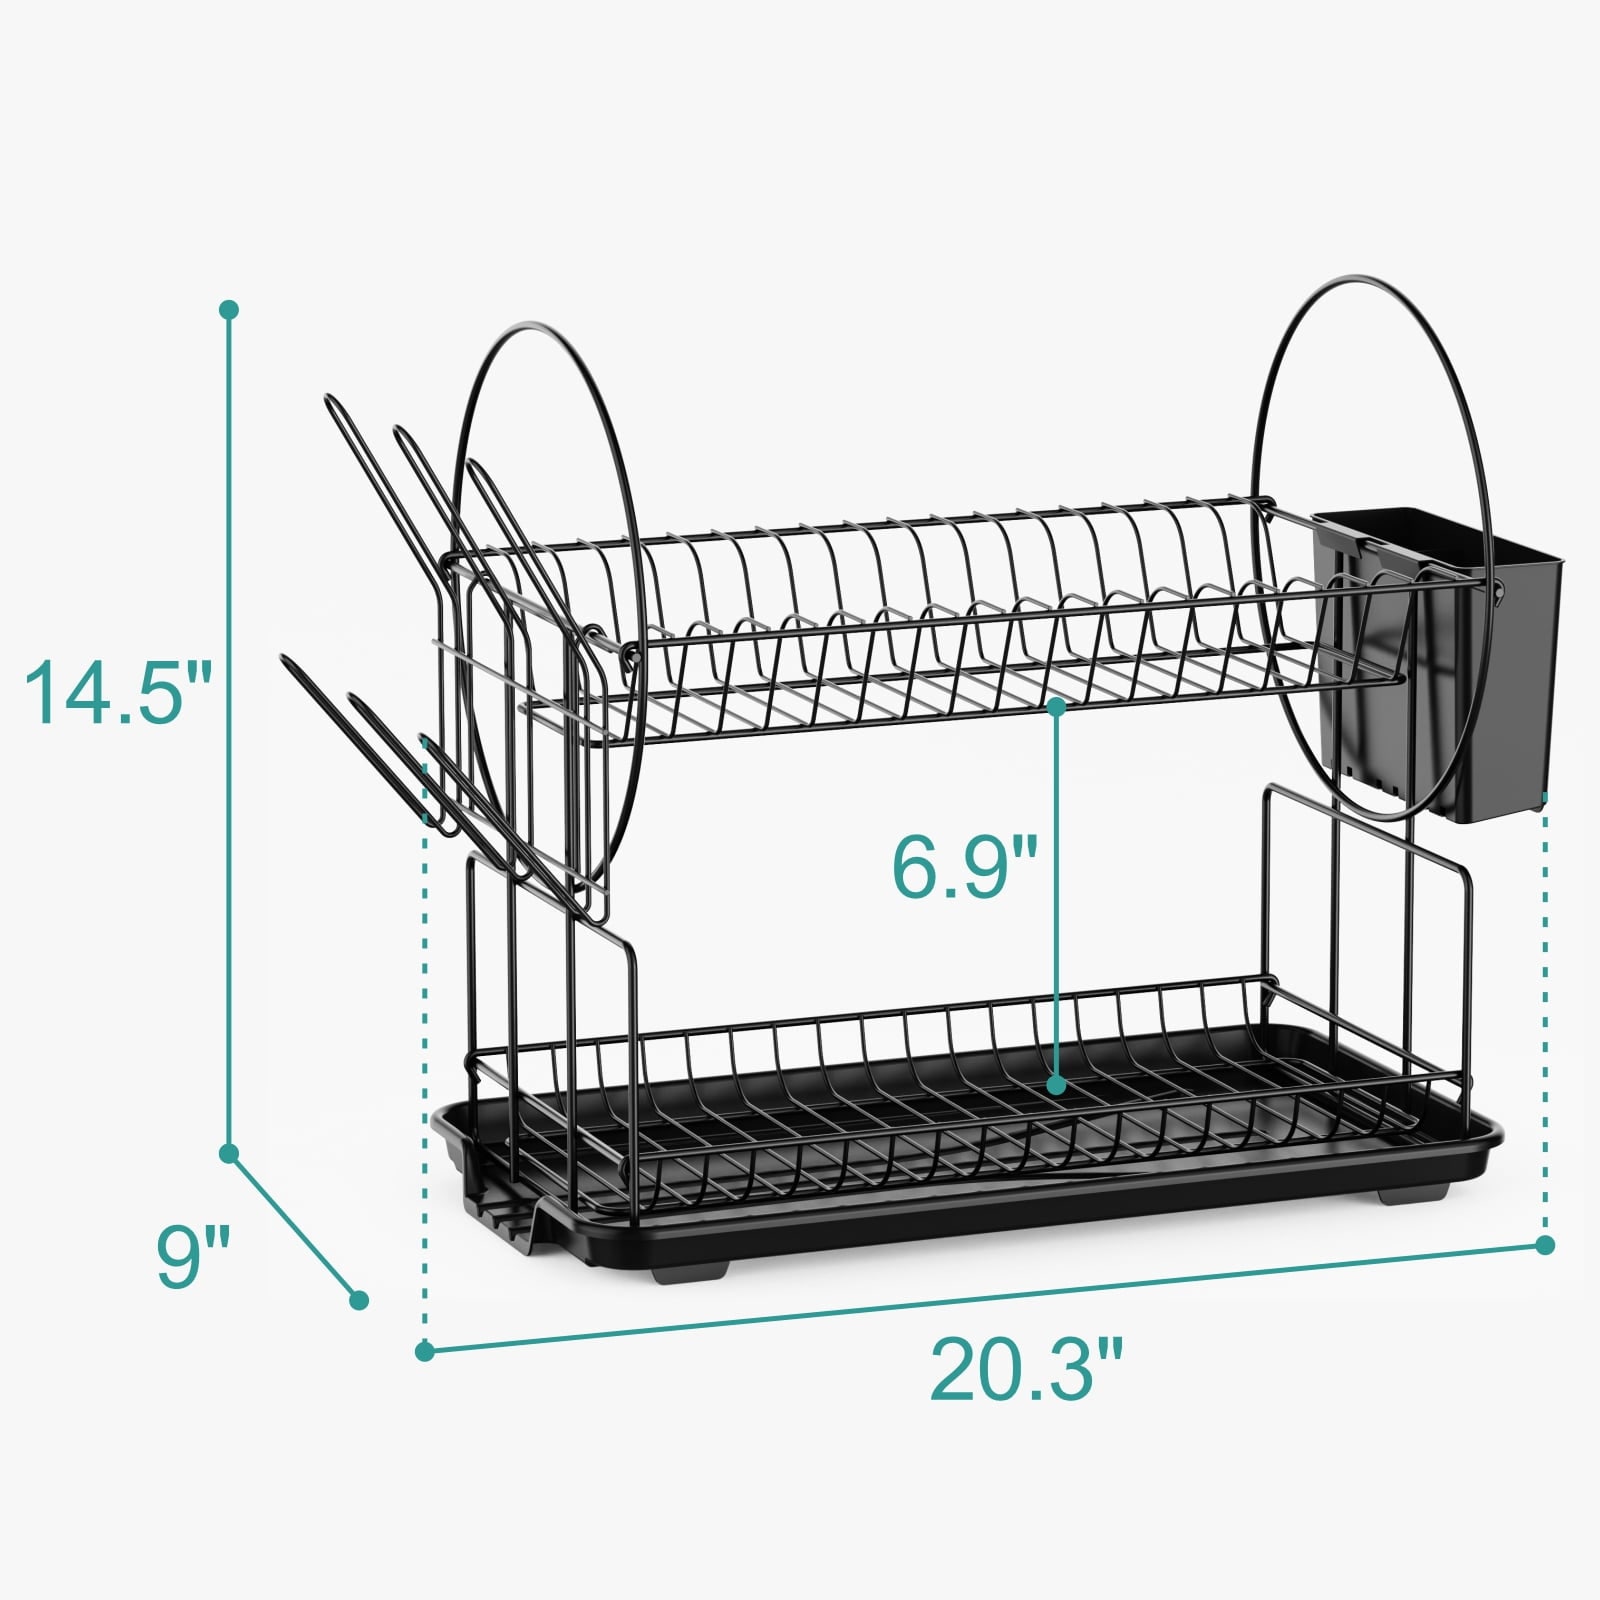 https://ak1.ostkcdn.com/images/products/is/images/direct/4d53d4109349780d32d9948e95a04f03480752bc/2-Tier-Dish-Rack-with-Drainer-Board.jpg